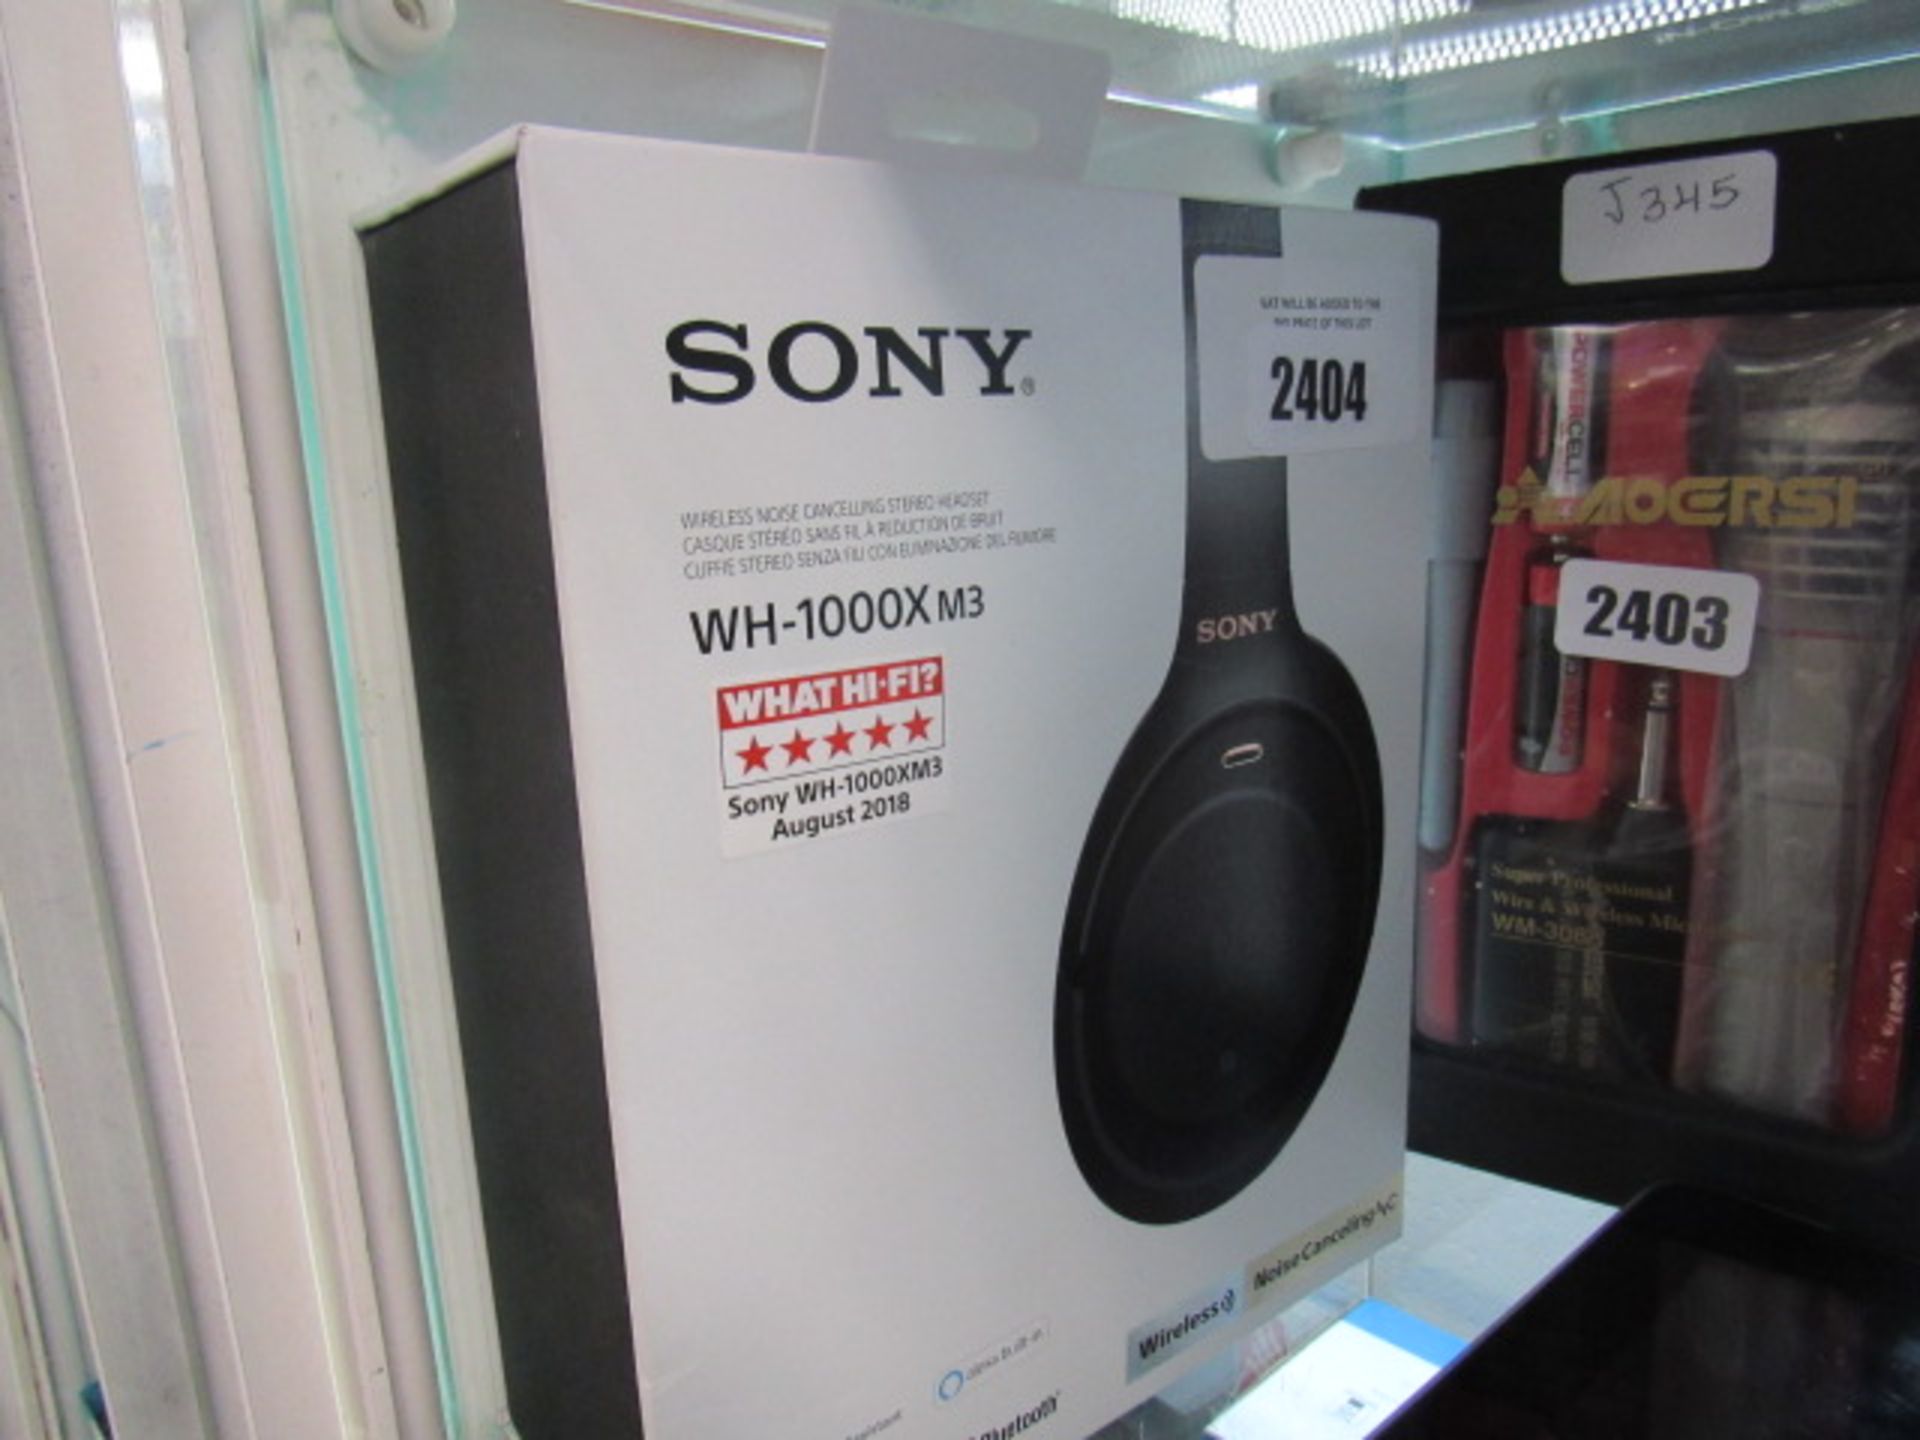 Sony WH1000XM3 wireless bluetooth noise cancelling headphones in box